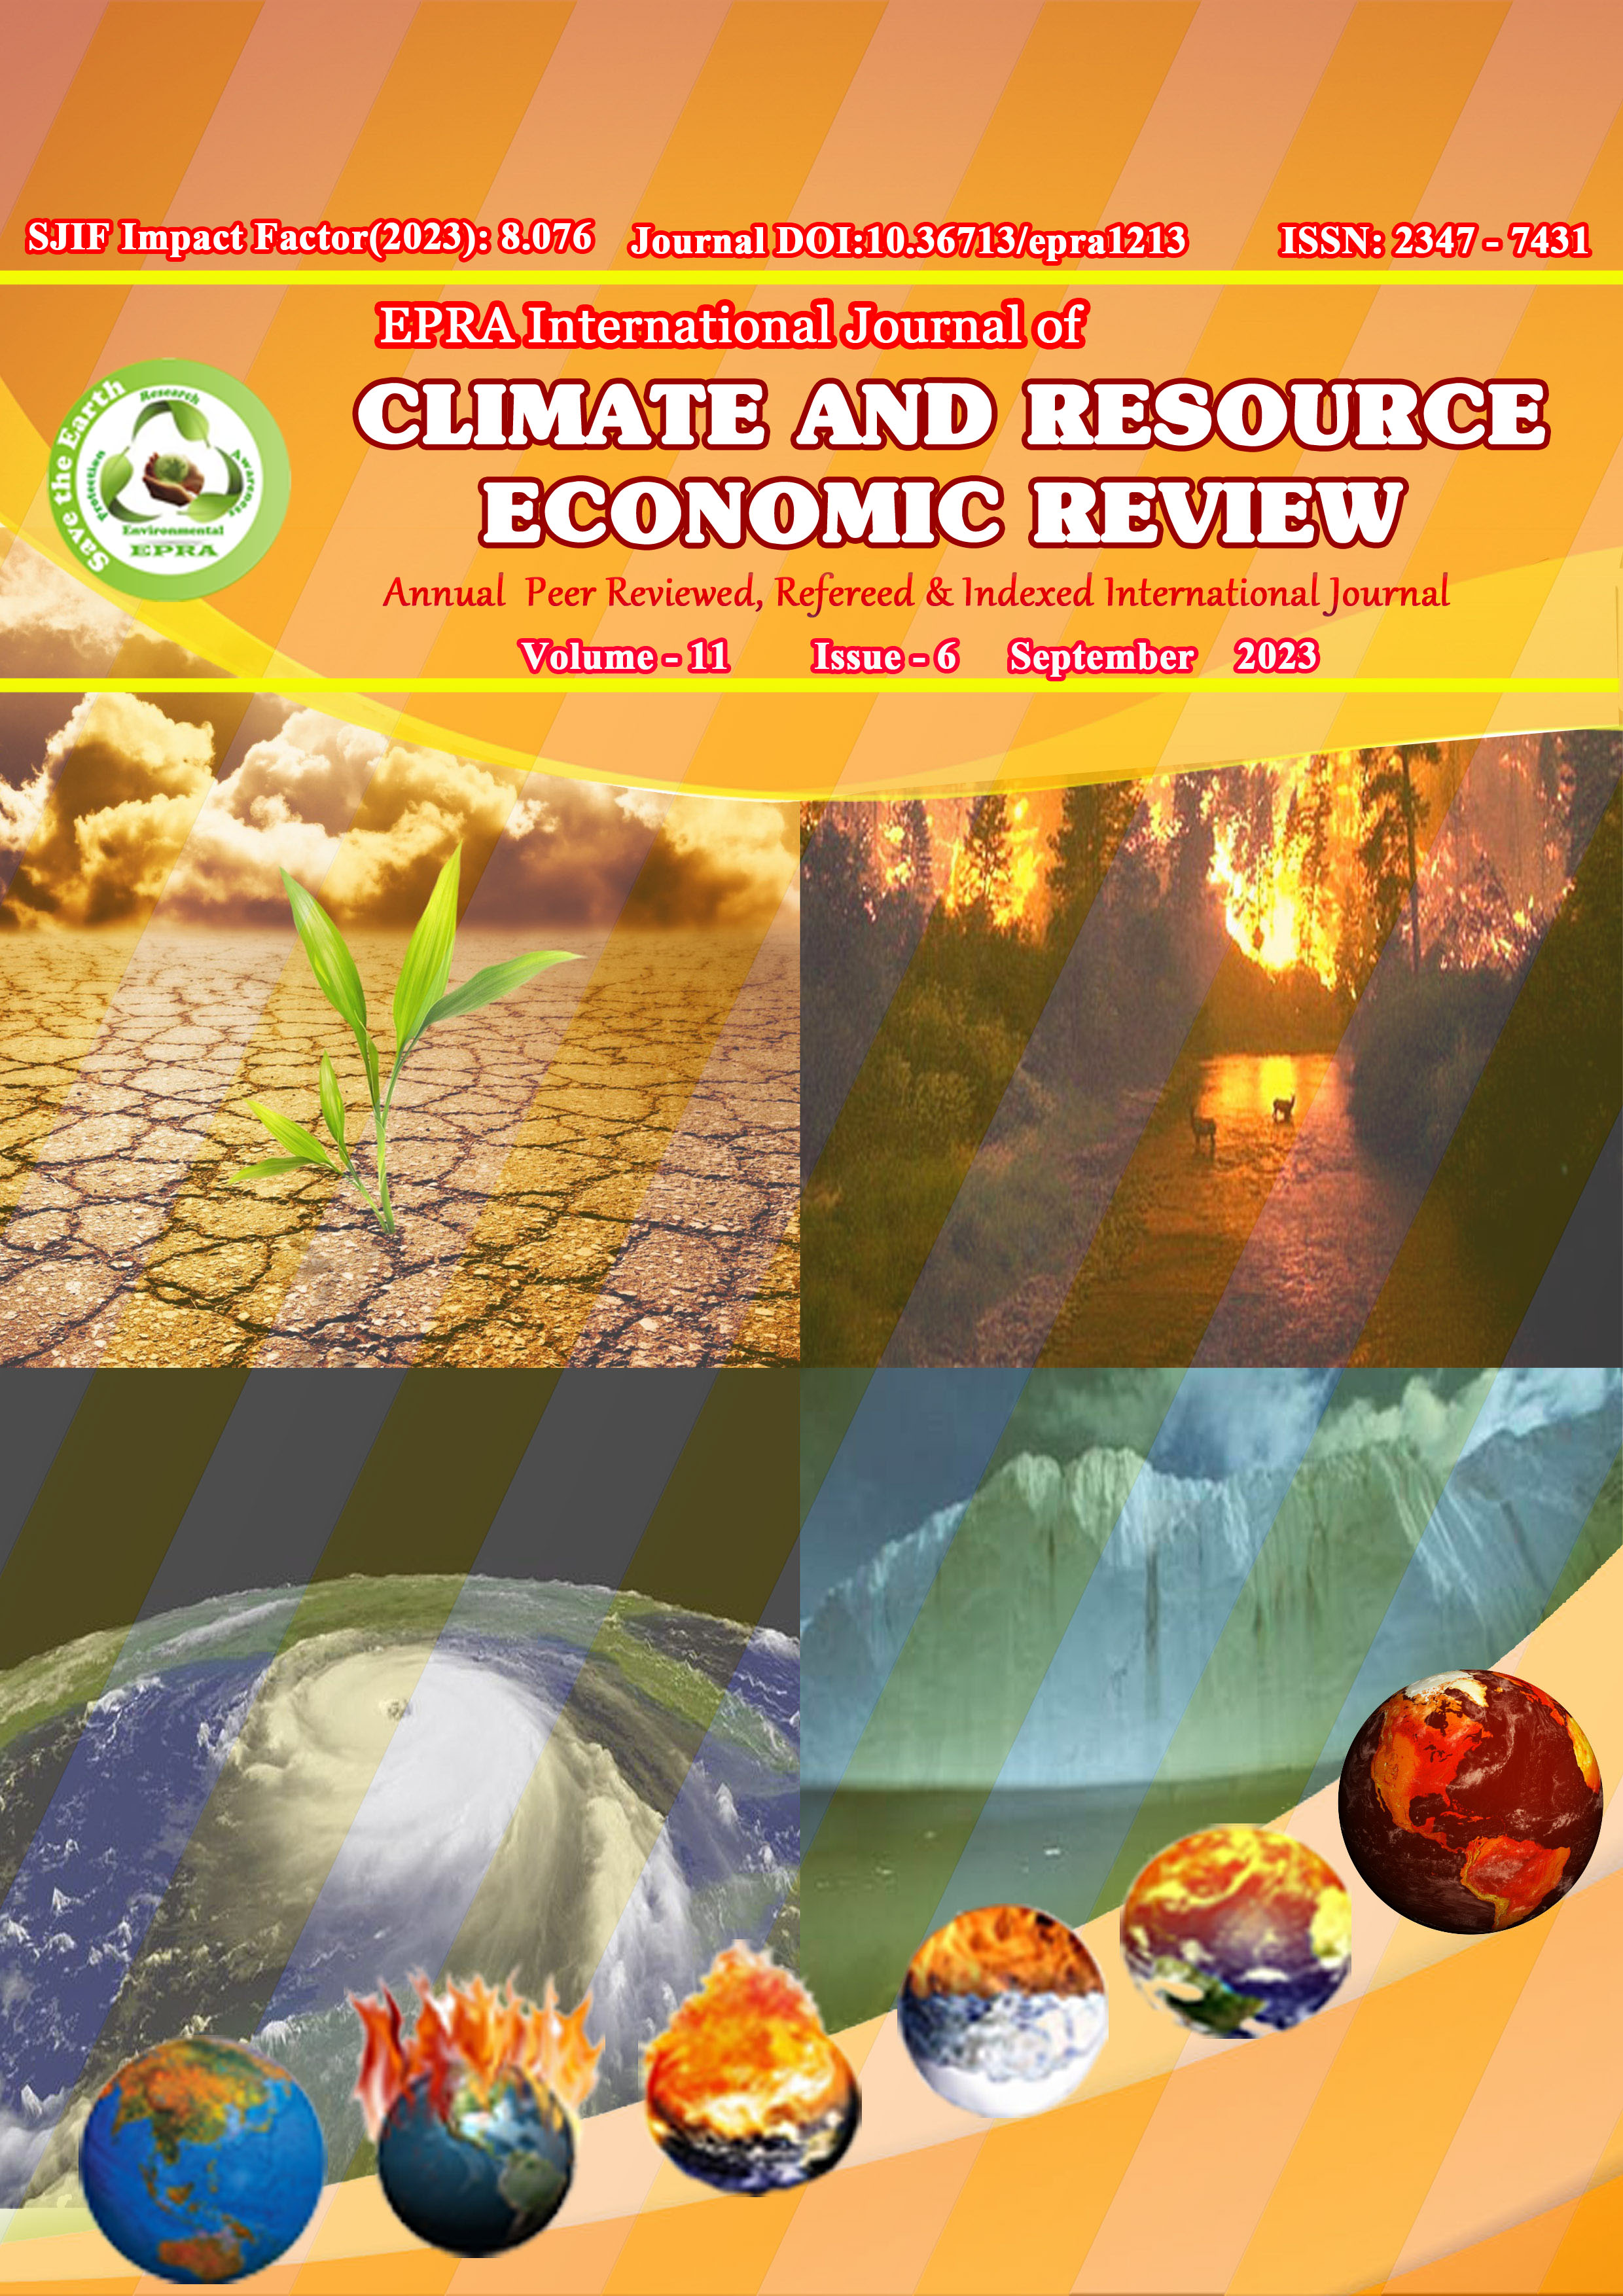 					View Vol. 11 No. 6 (2023): EPRA International Journal of Climate and Resource Economic Review(CRER)
				